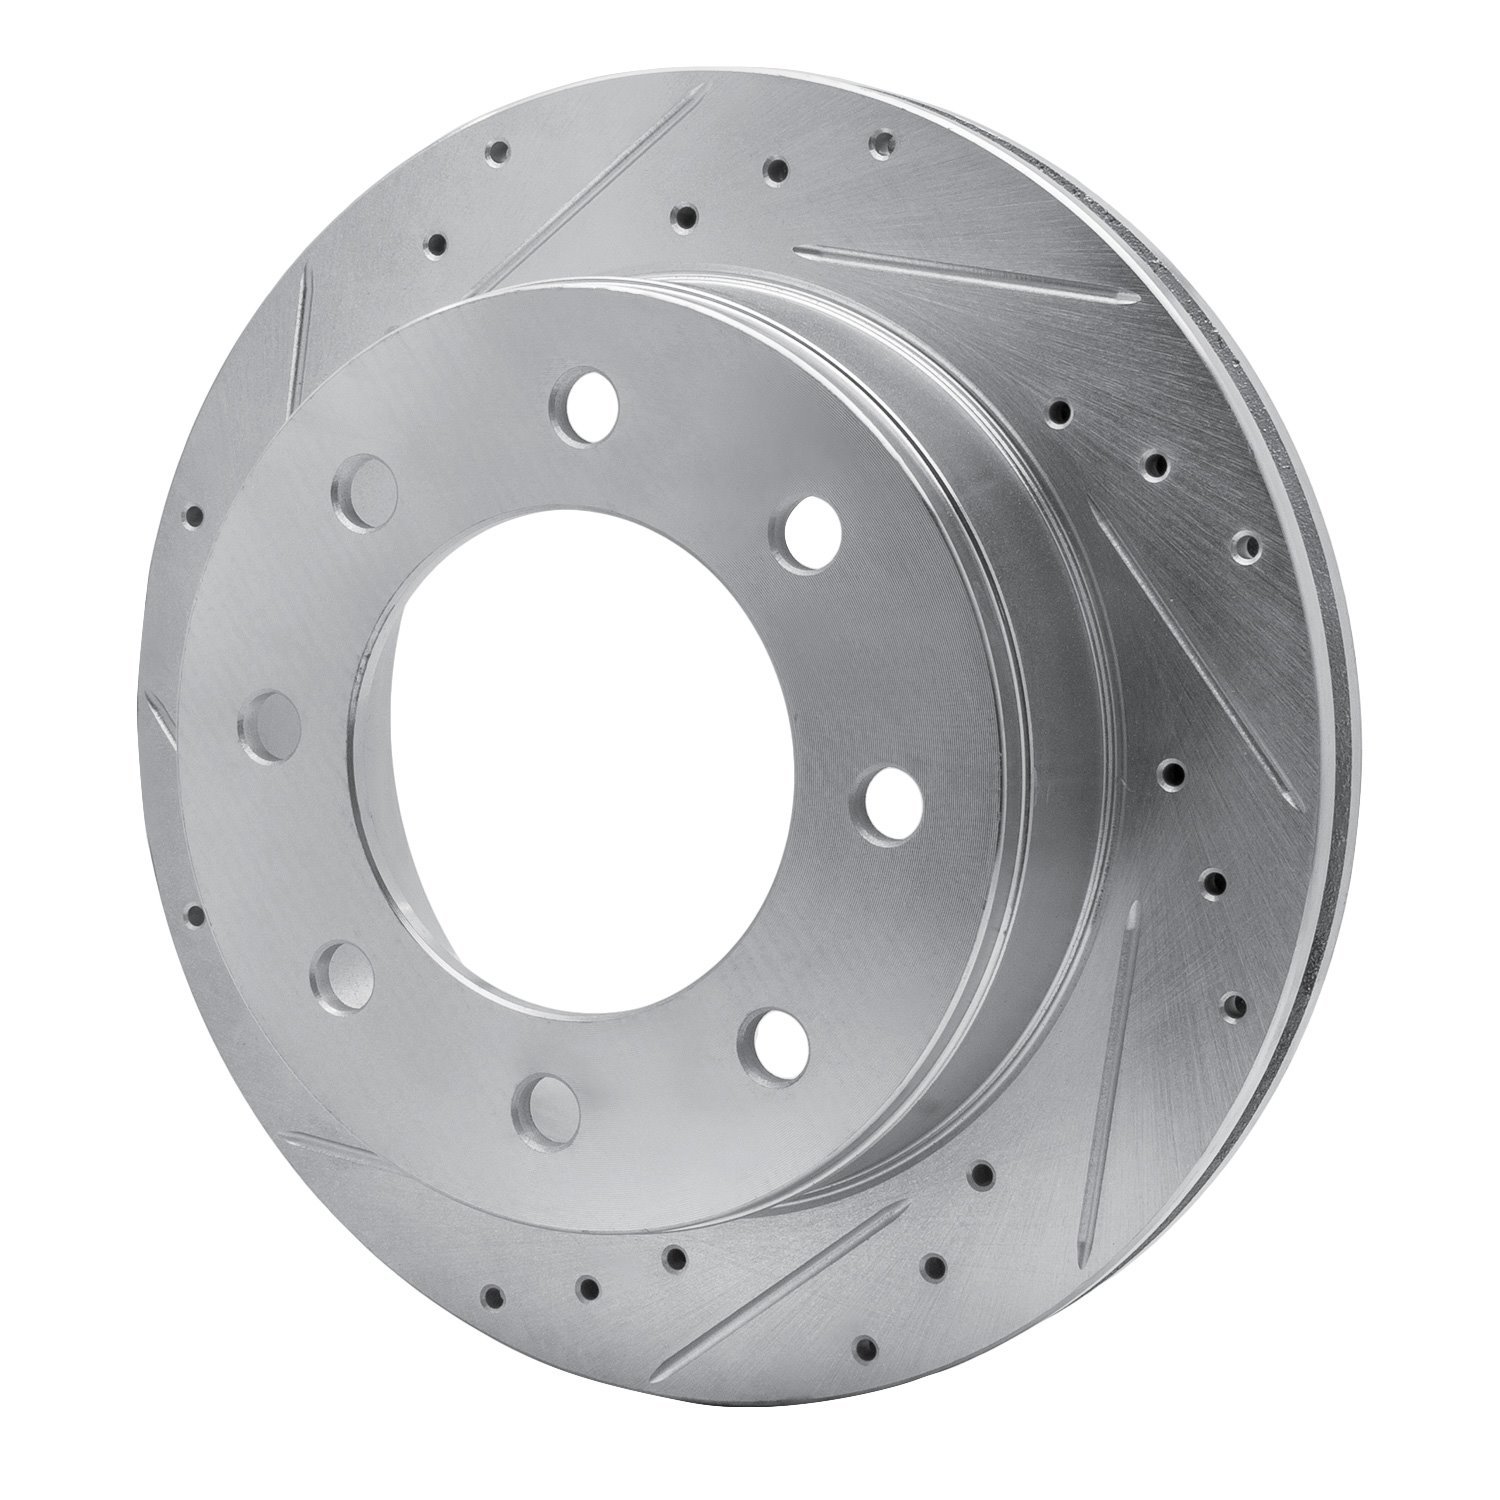 E-Line Drilled & Slotted Silver Brake Rotor, Fits Select Fits Multiple Makes/Models, Position: Rear Left